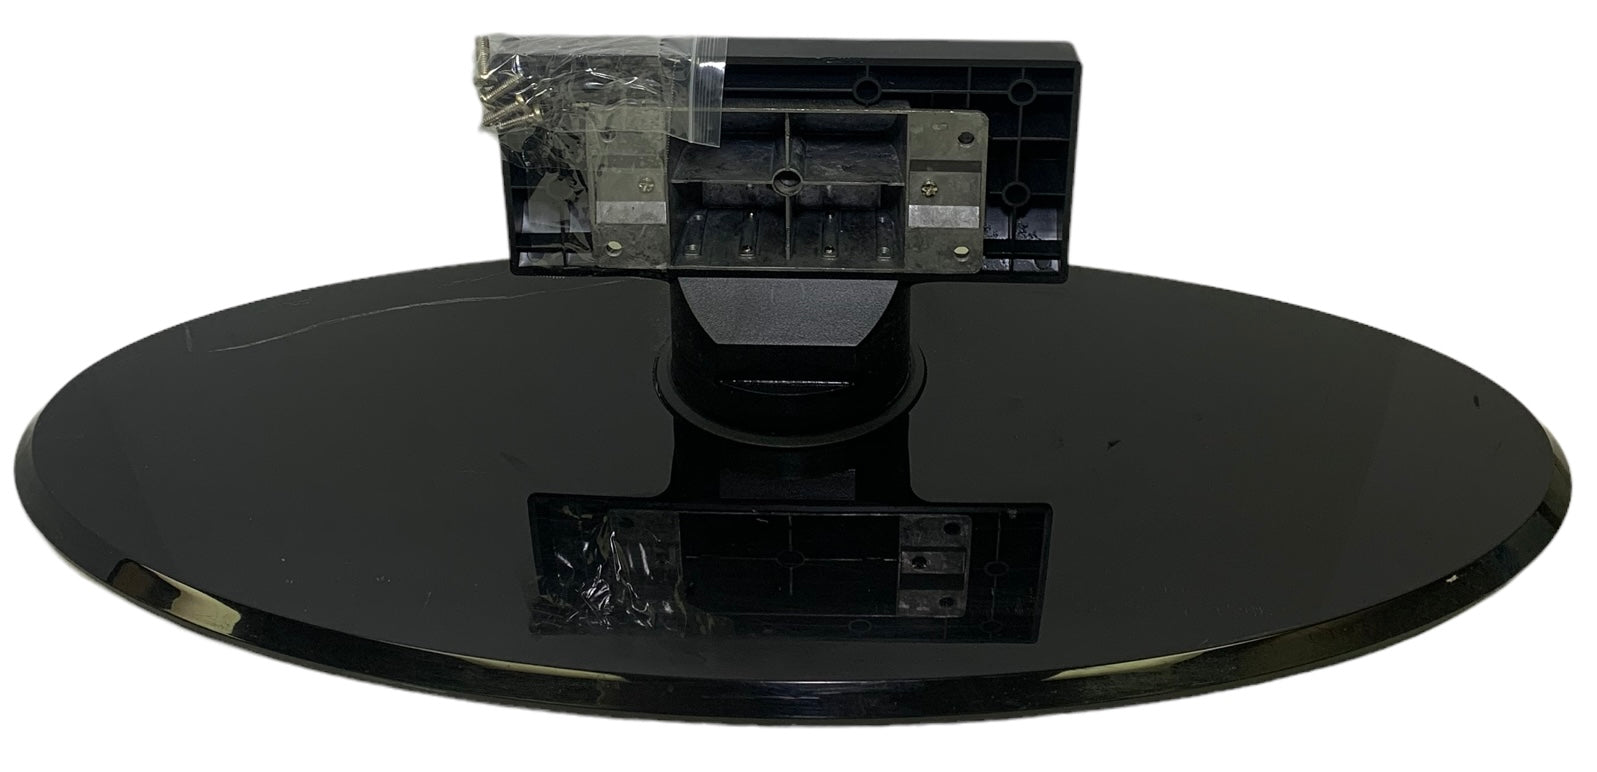 Dynex DX-PDP42-09 TV Stand/Base